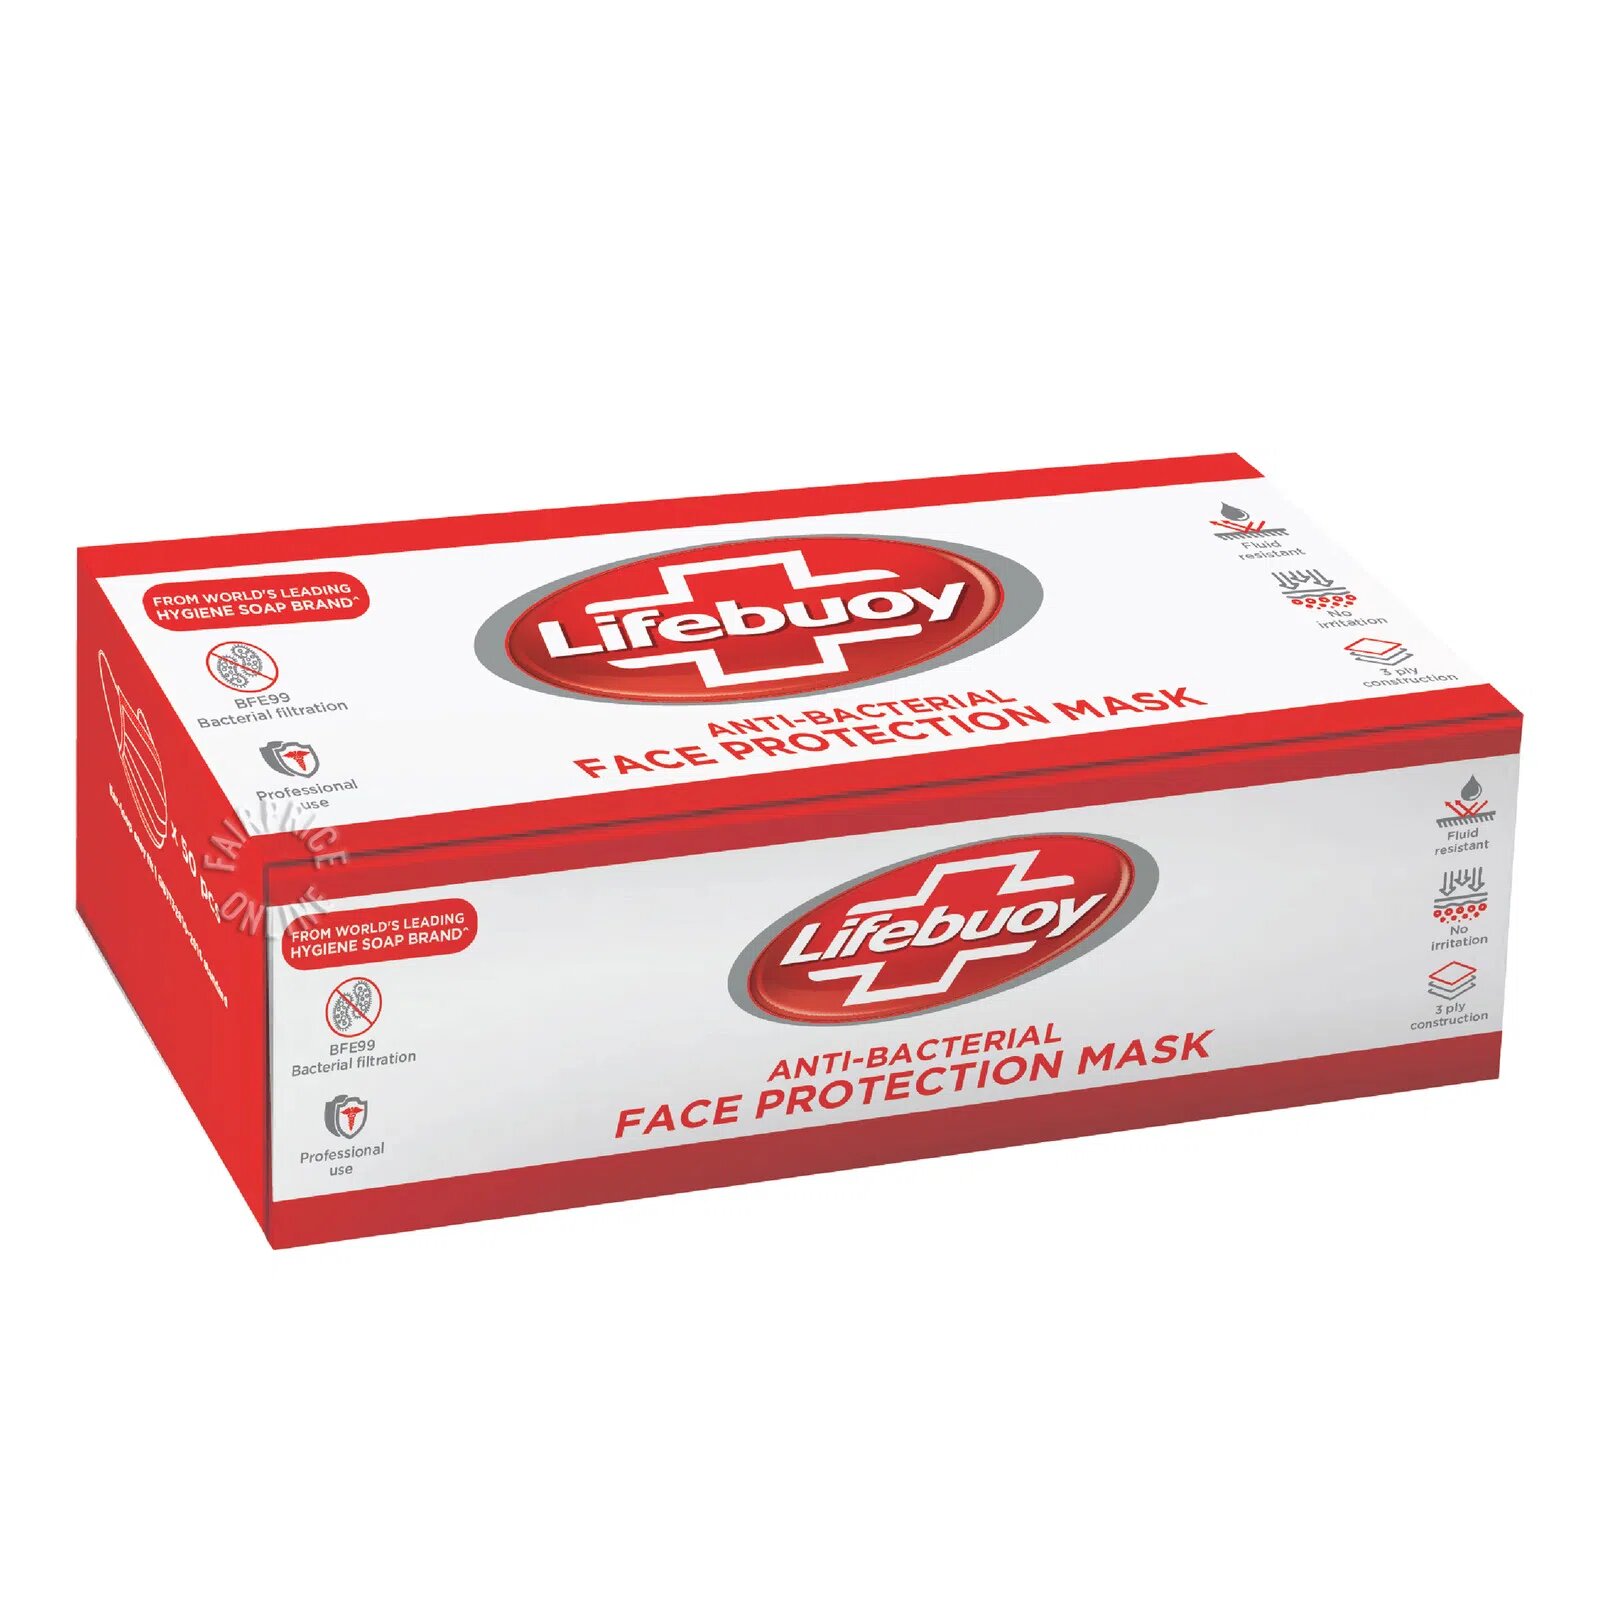 Lifebuoy Anti-Bacterial Face Protection Mask (3 Ply)